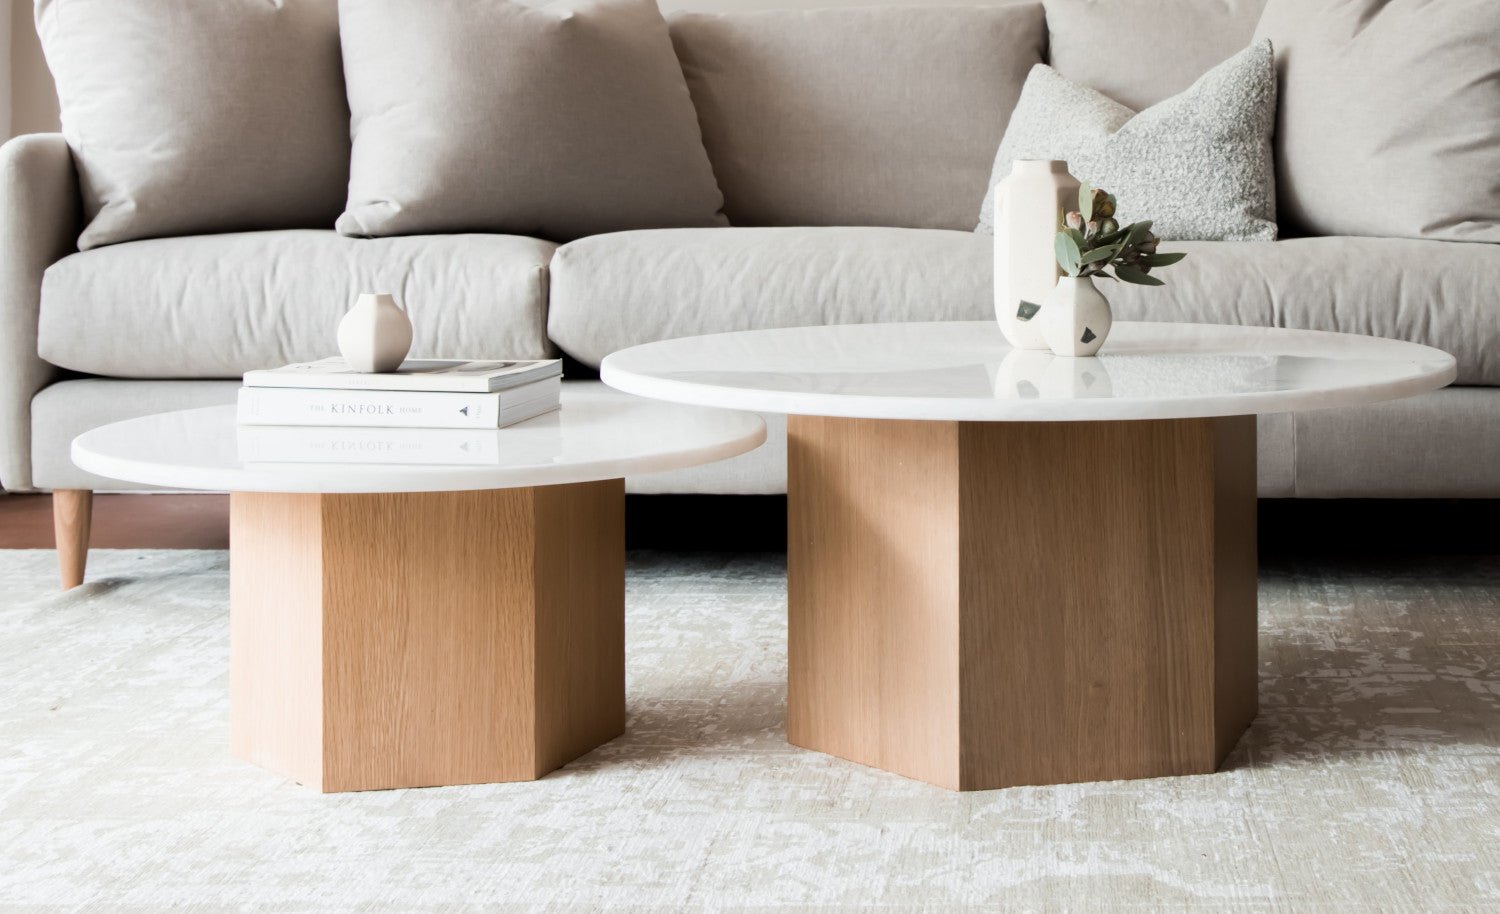 How To Decorate A Coffee Table - Nathan James